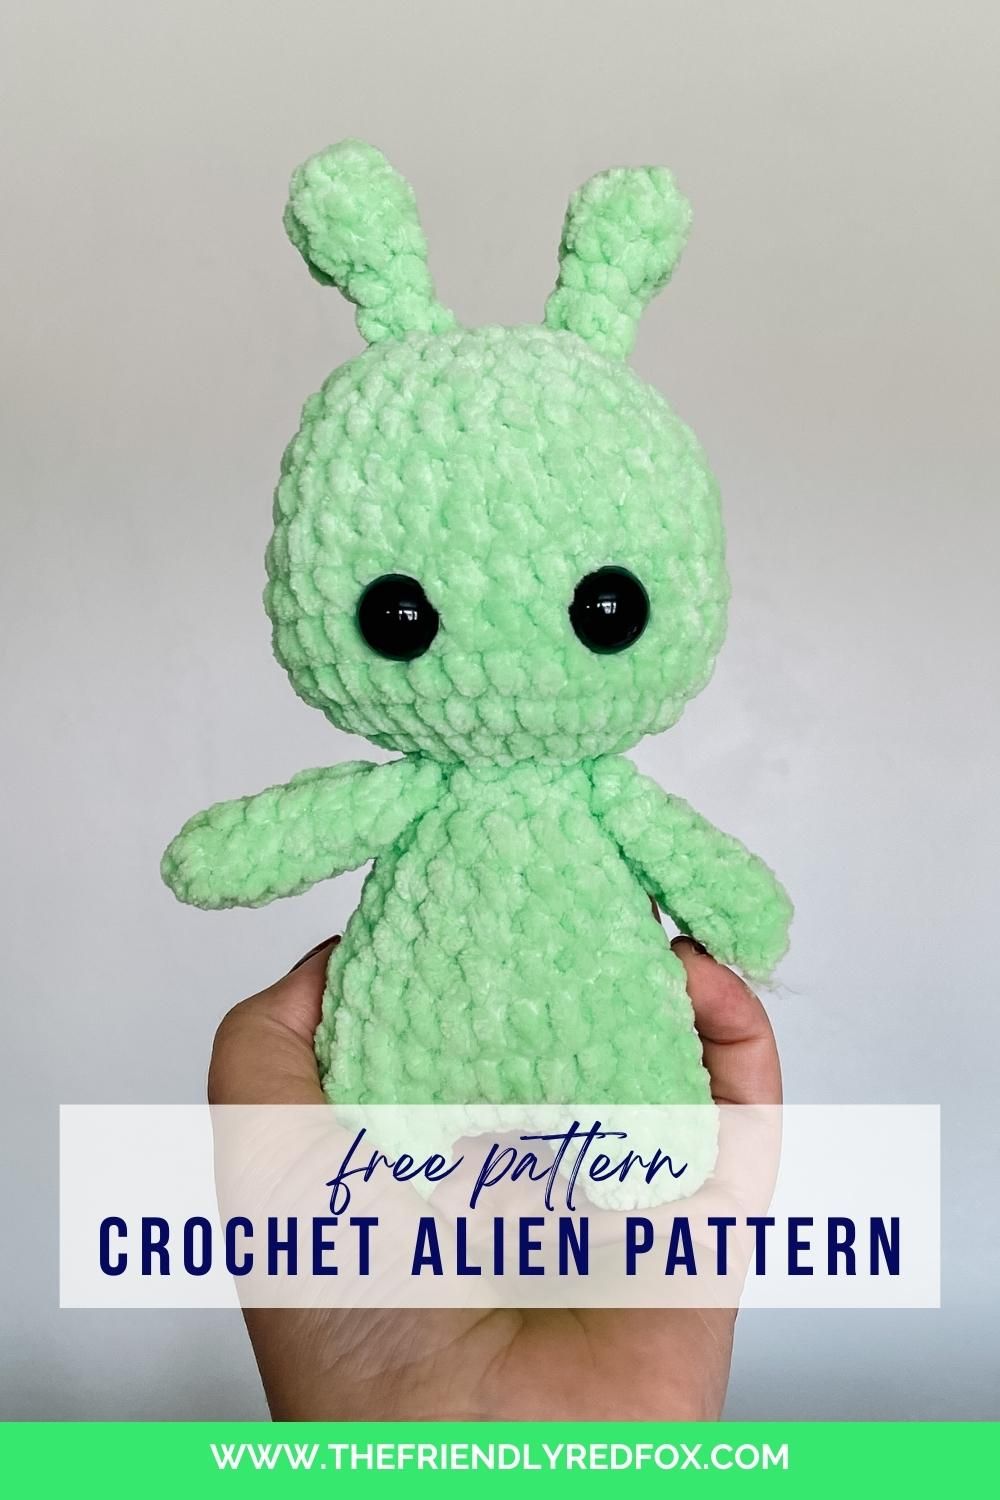 This crochet alien pattern will knock you out of this world for three reasons: it is very low sew, works up quickly, and is made with cuddly, plush yarn.